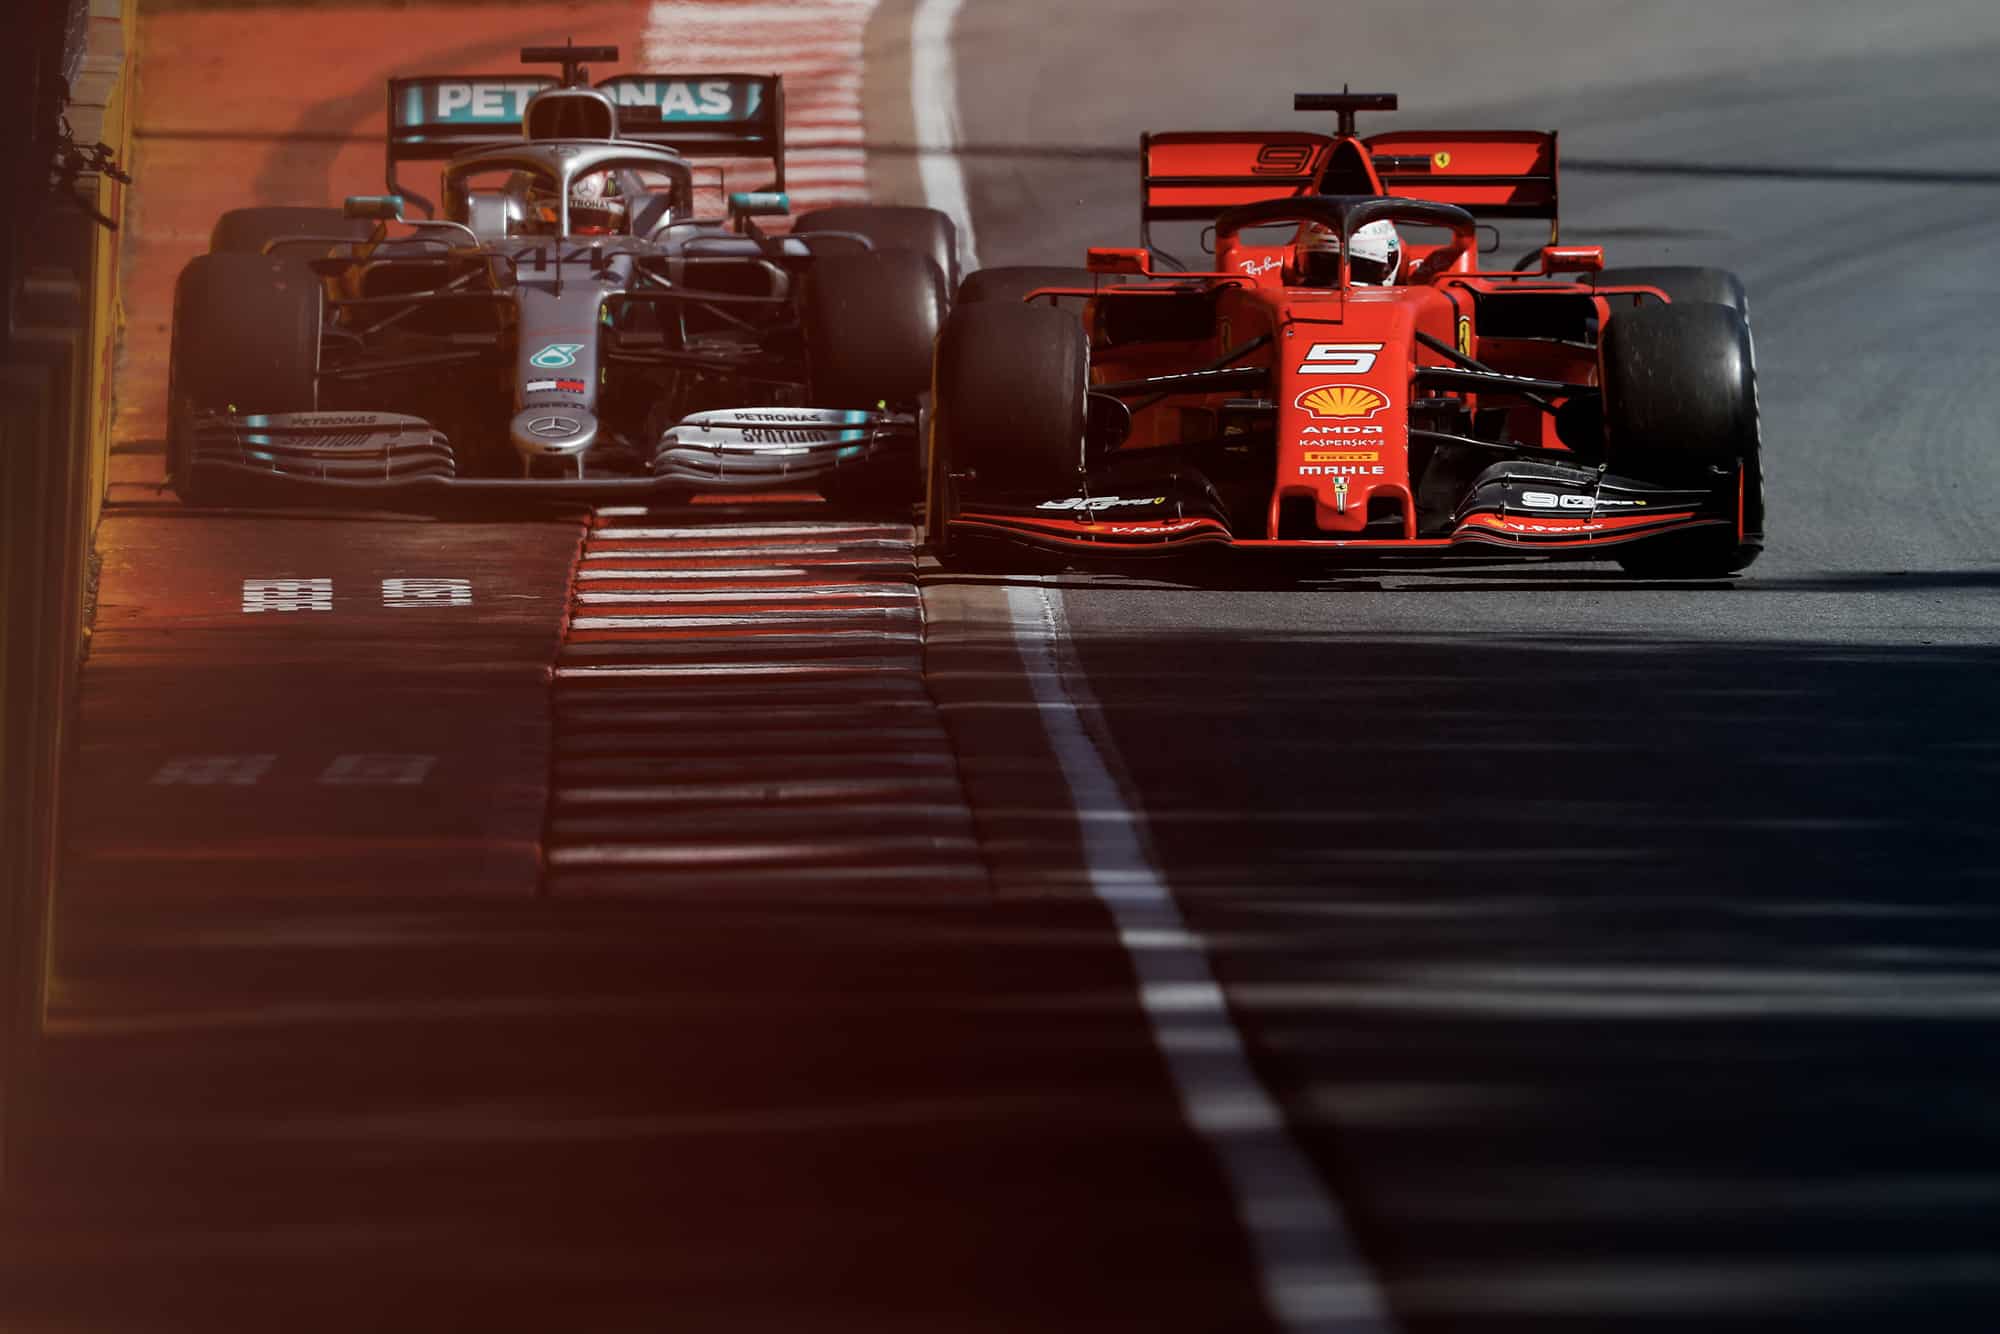 Sebastian Vettel squeezes Lewis Hamilton against the wall during the 2019 Canadian Grand Prix